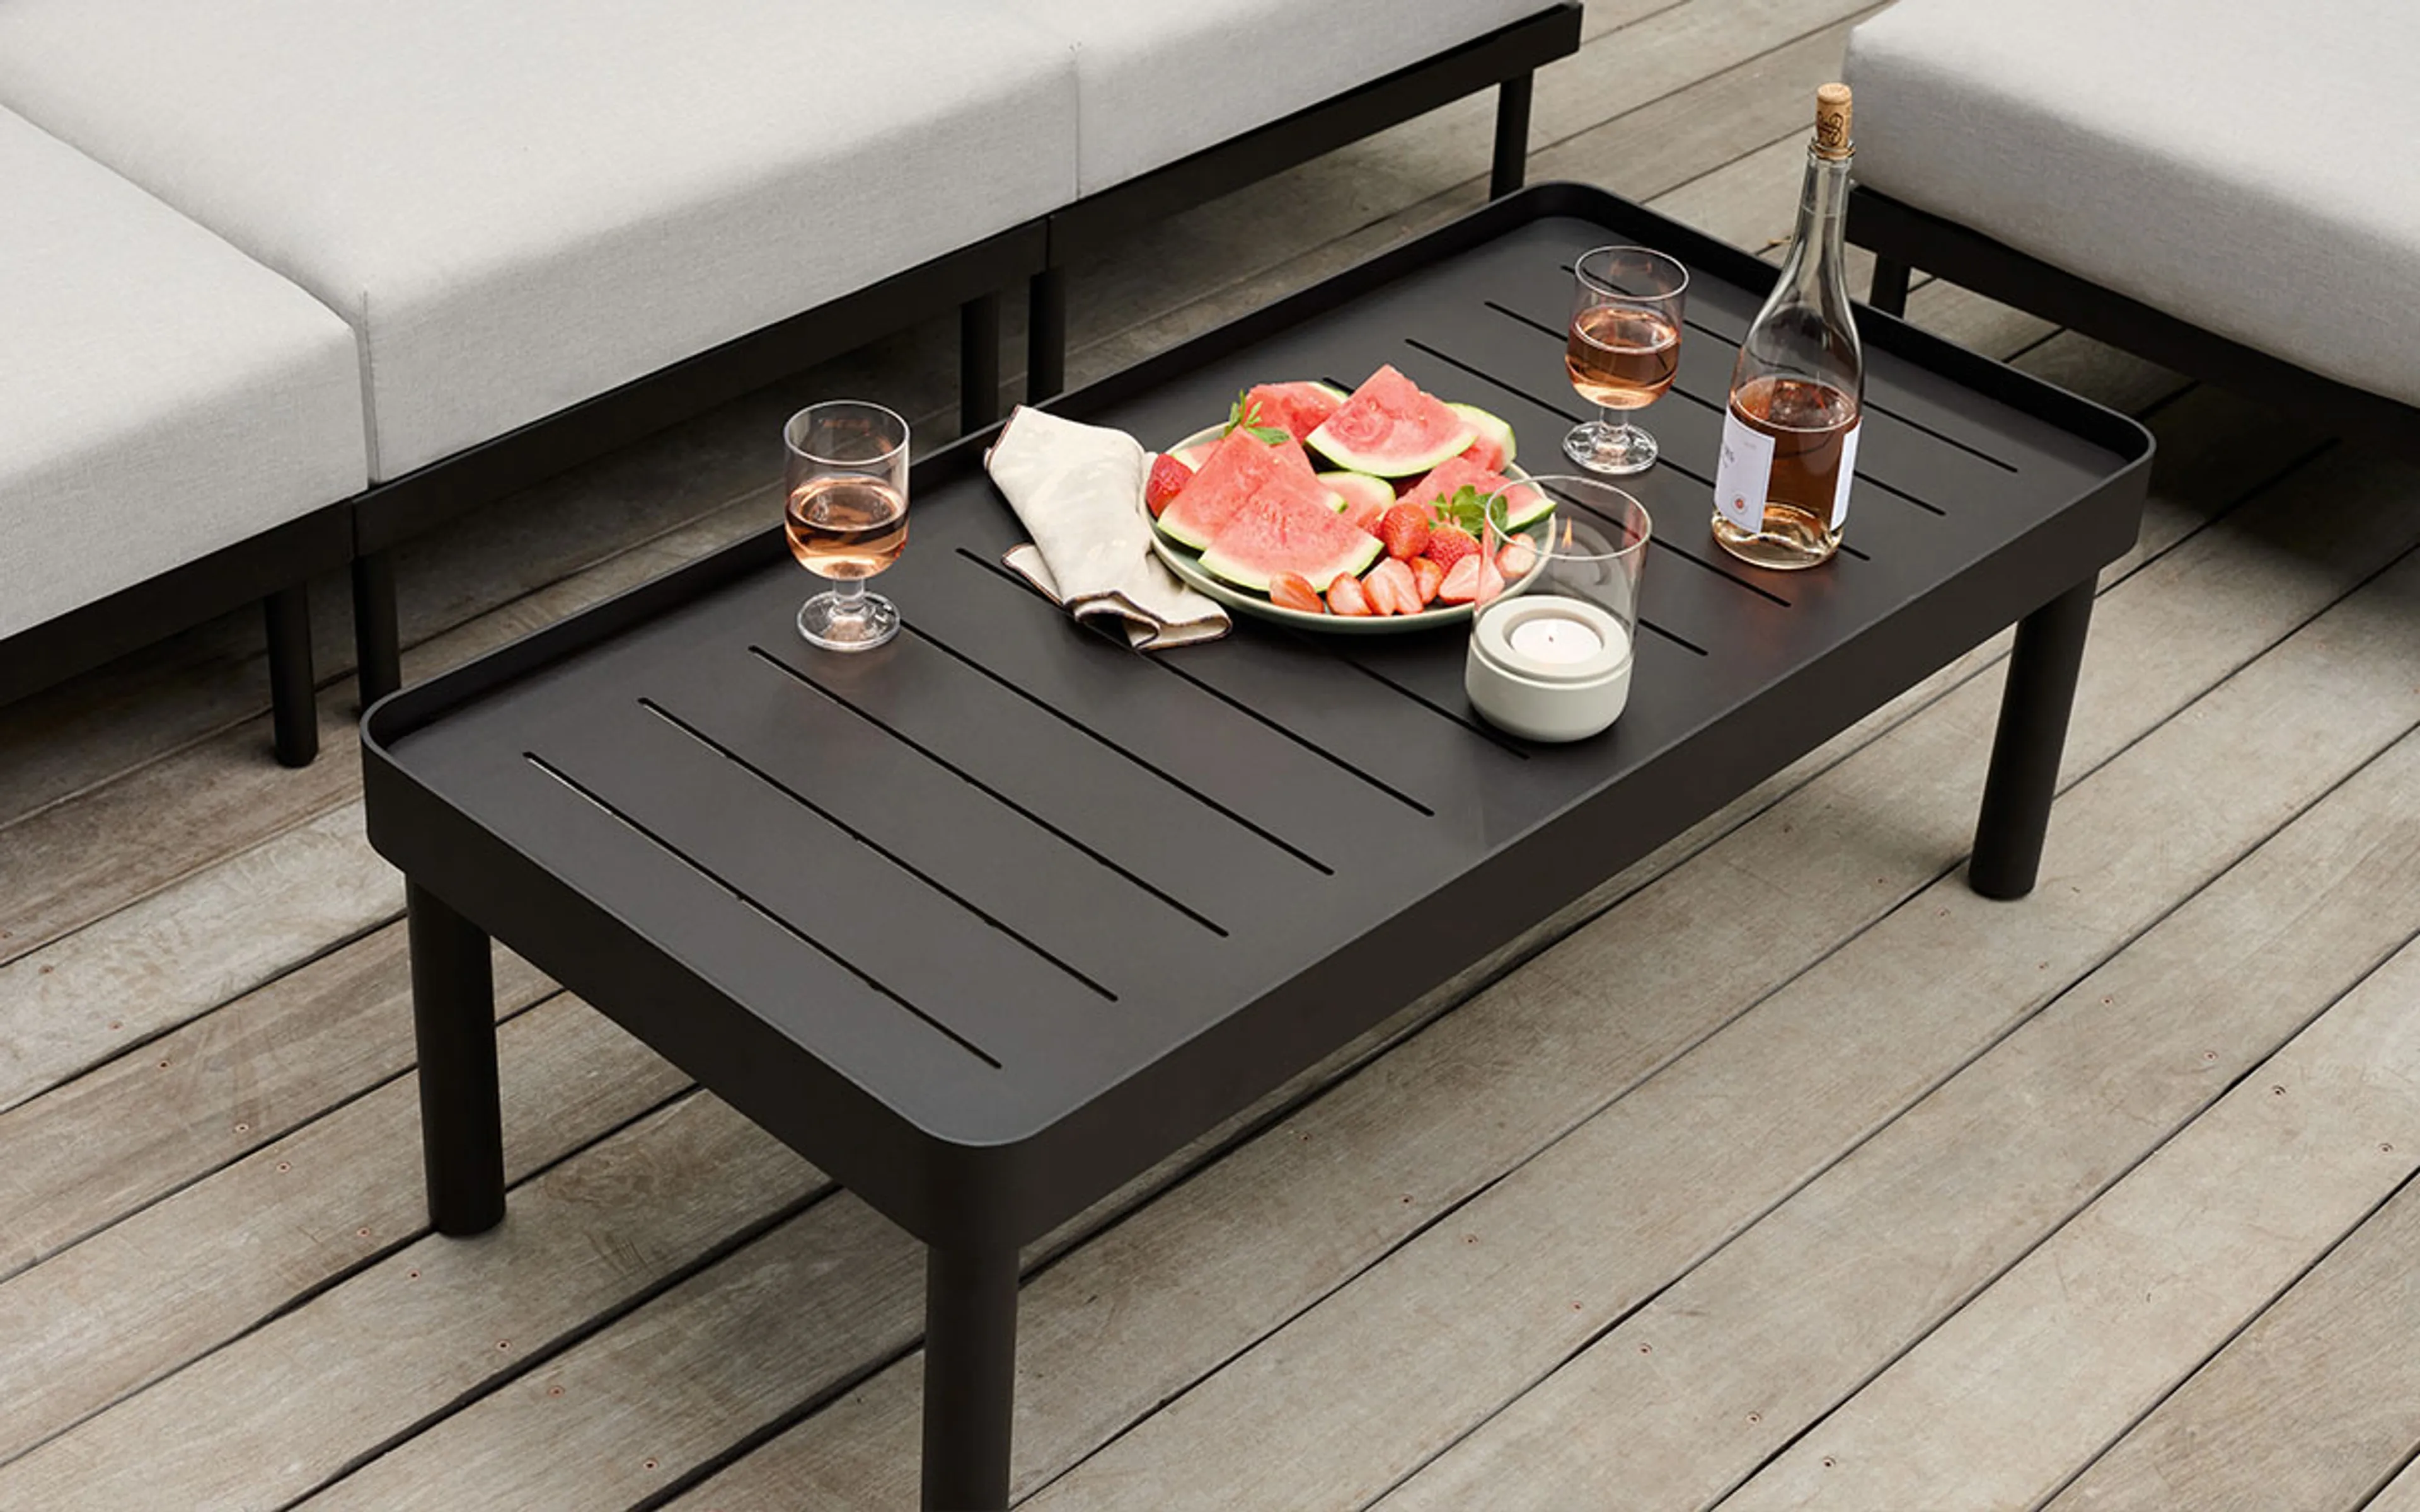 Relay Outdoor Coffee Table